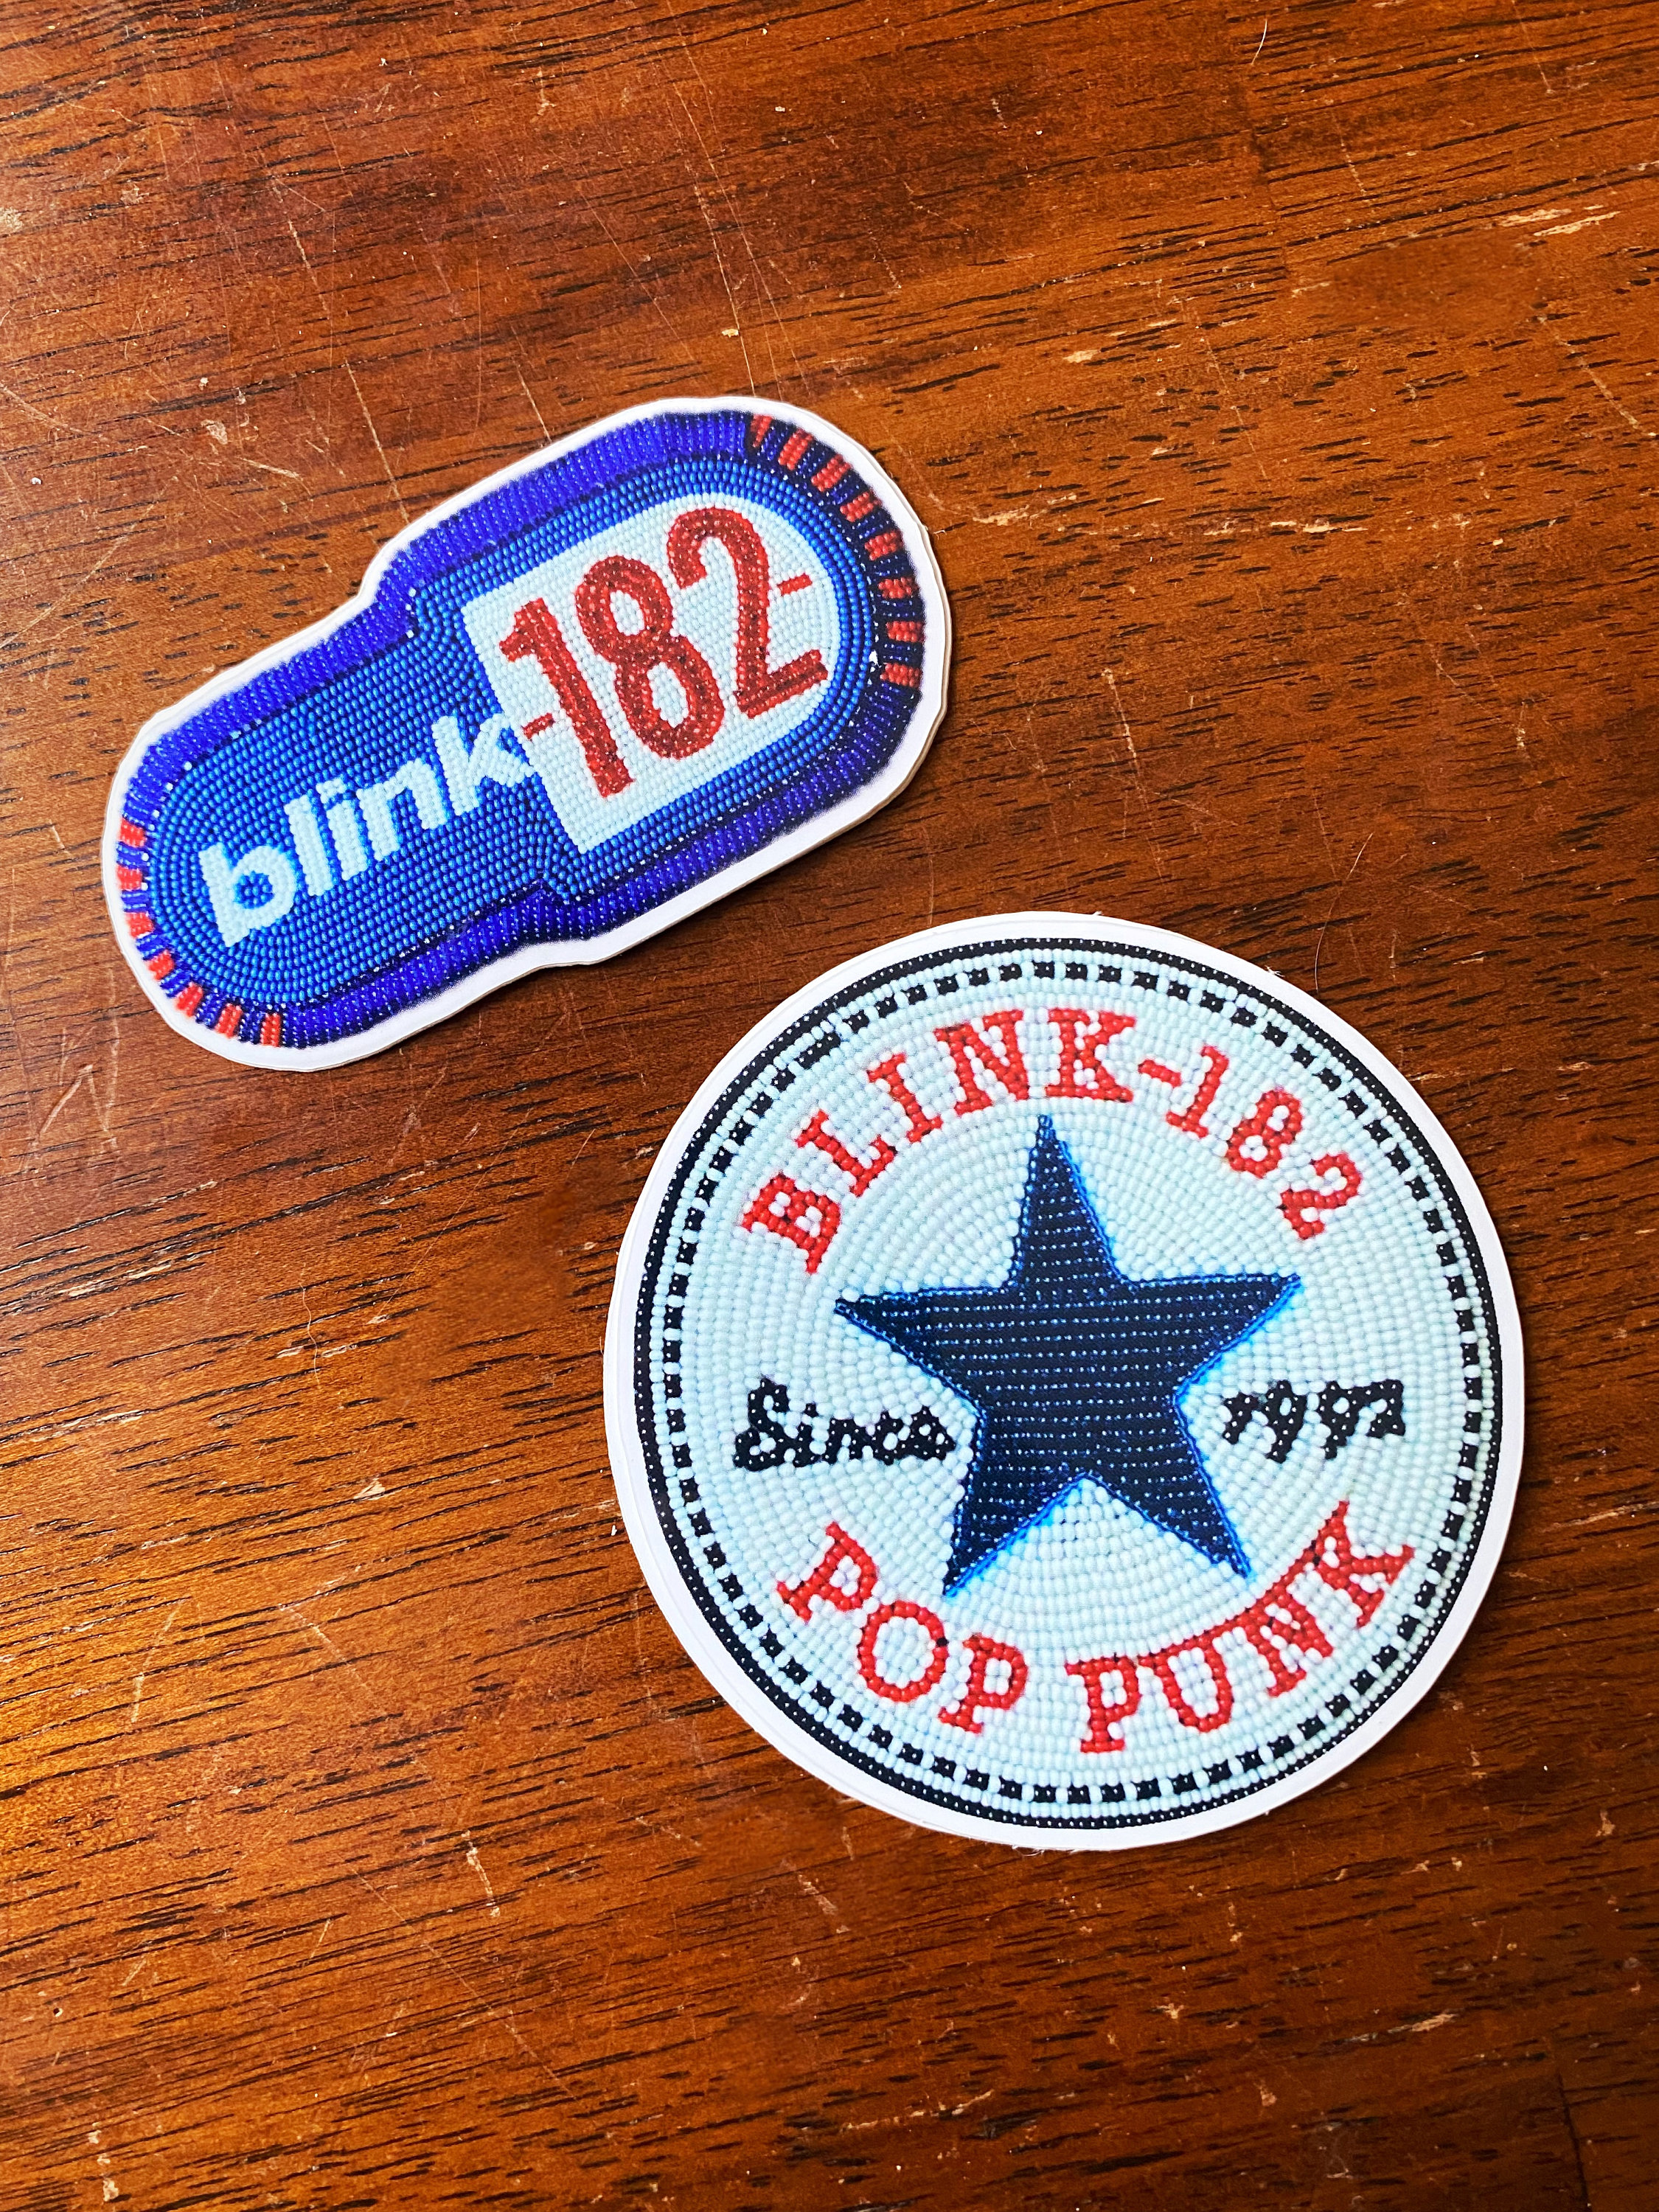 Blink-182 and Colorado Avalanche 2022, Custom prints store